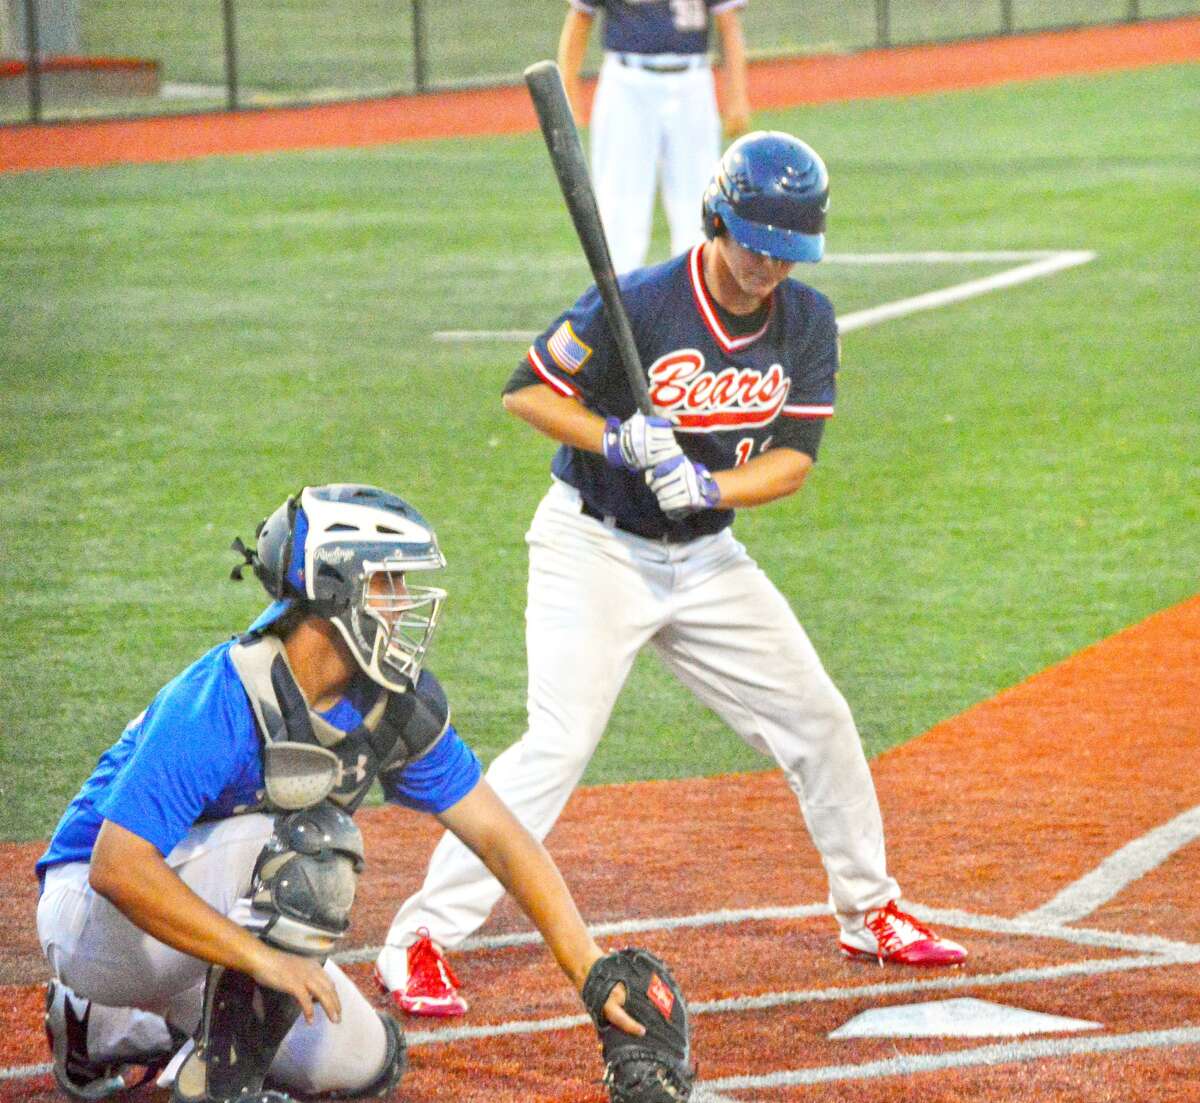 Metro-East second baseman Joel Quirin looks at a pitch low during his first-inning at-bat against Belleville on Tuesday at SIUE.